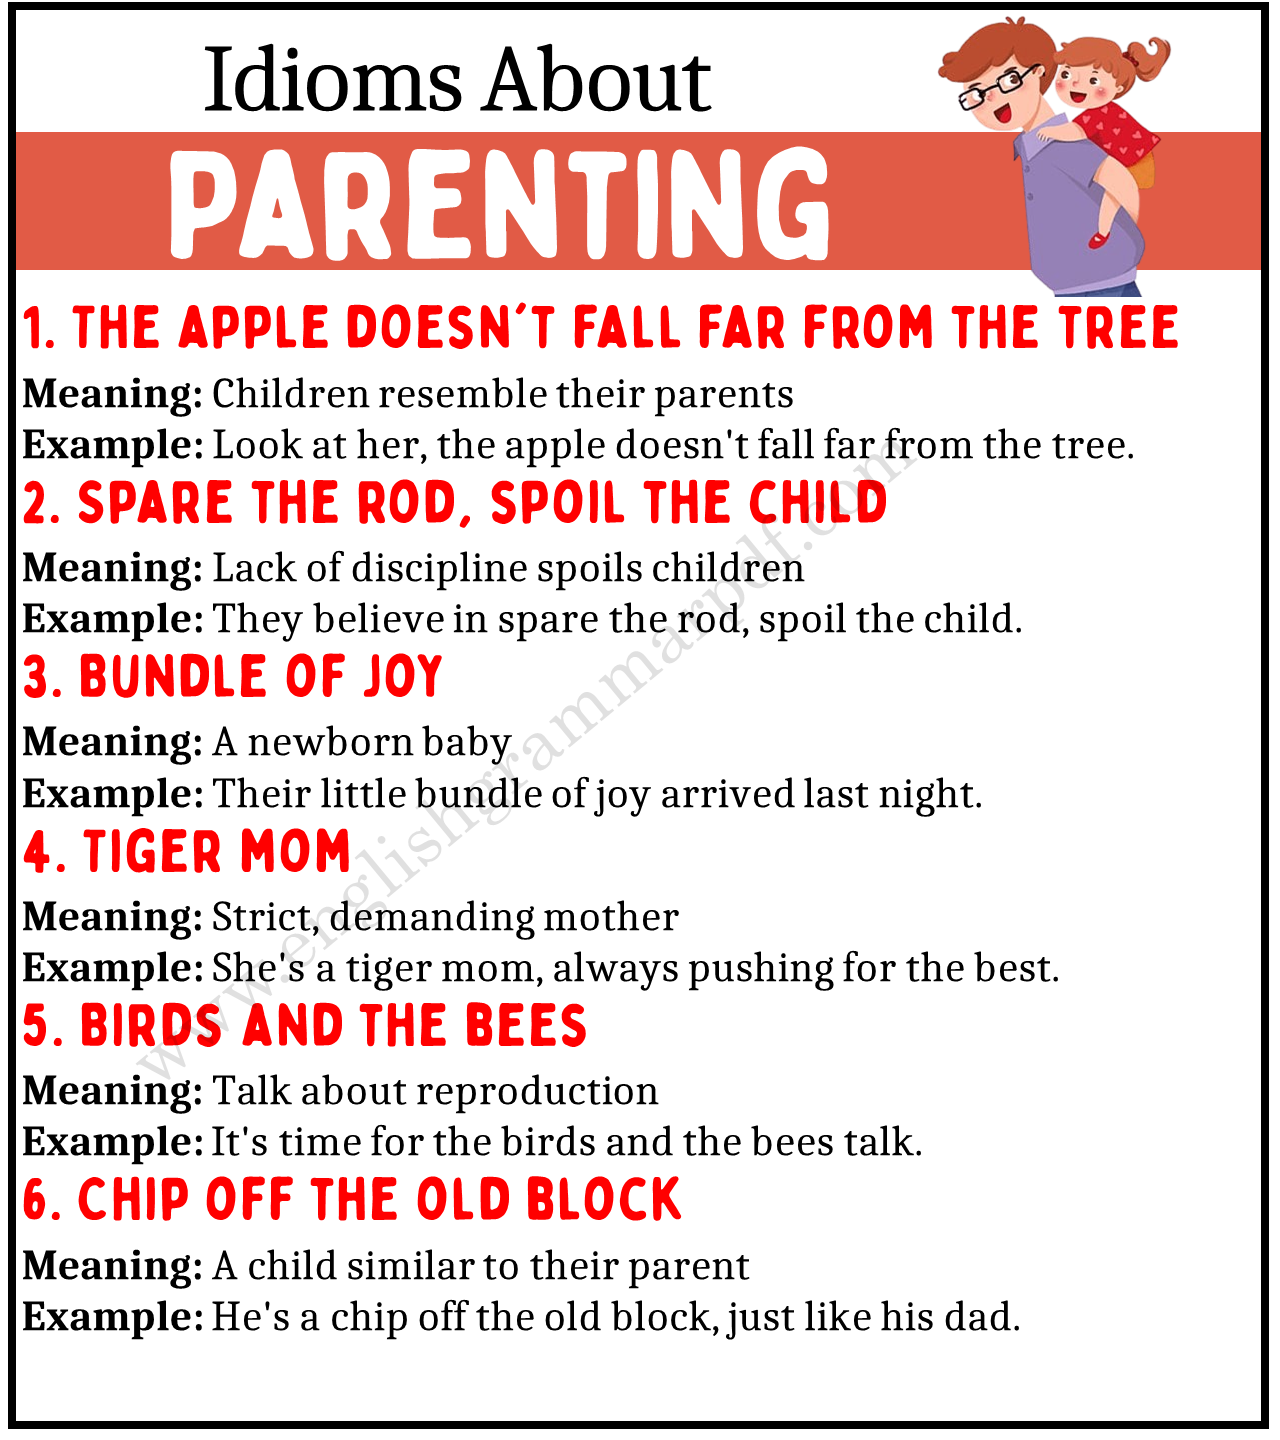 Idiomatic Ways to Talk about PARENTING